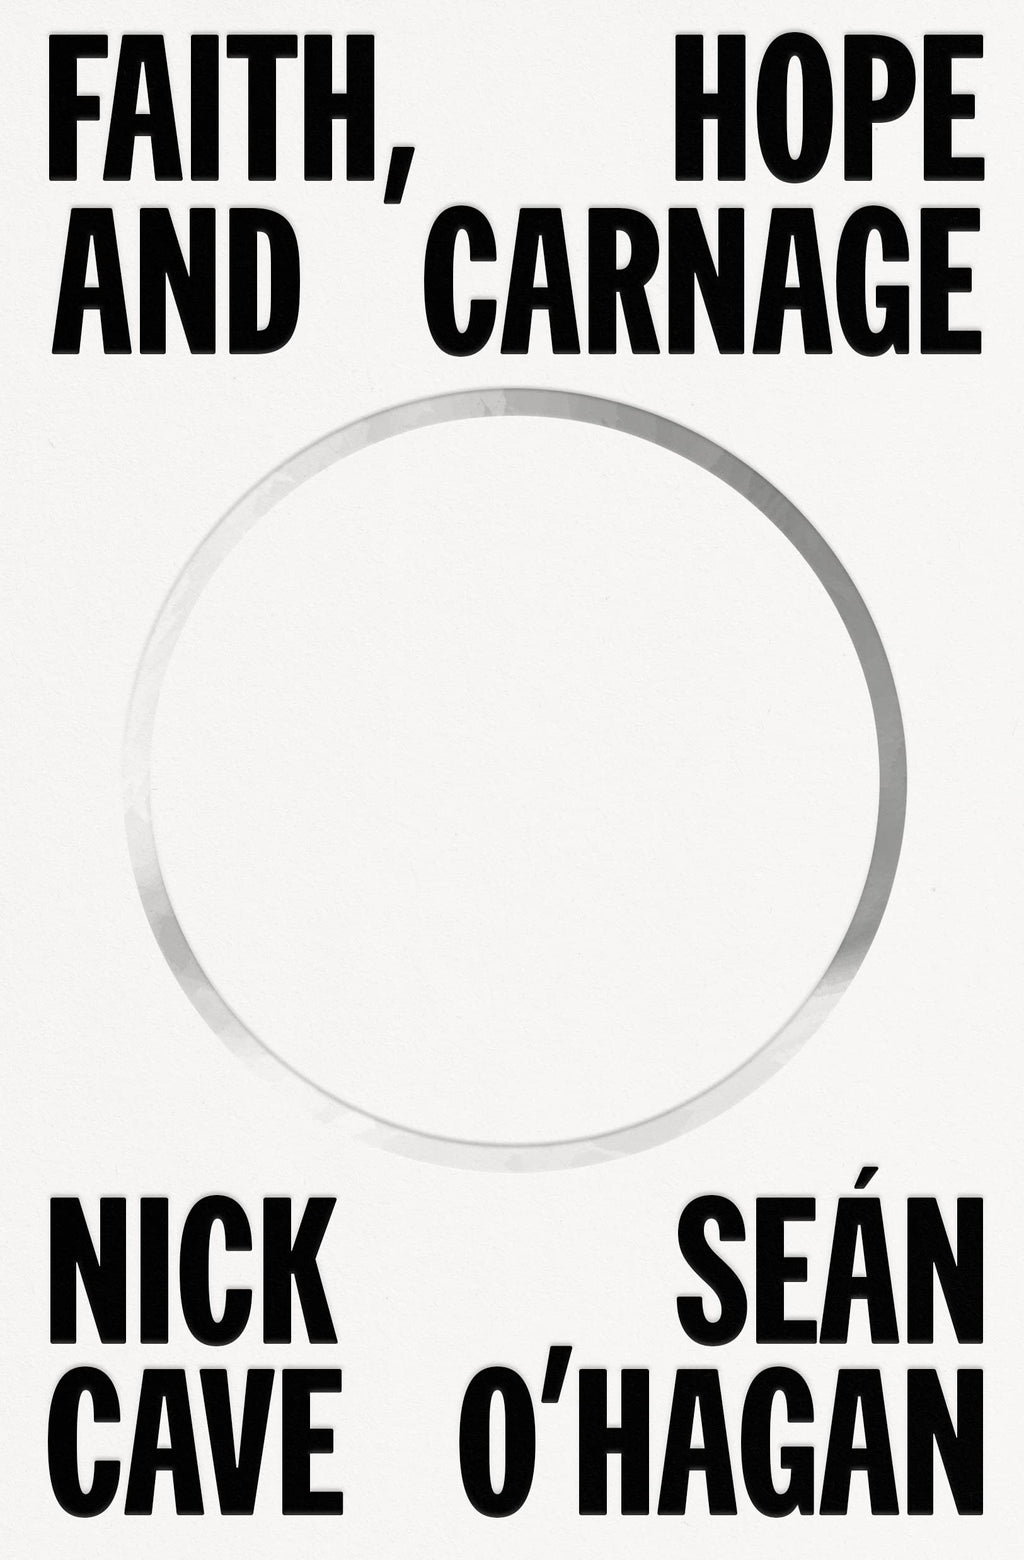 Faith, Hope and Carnage by Nick Cave and Sean O'hagan